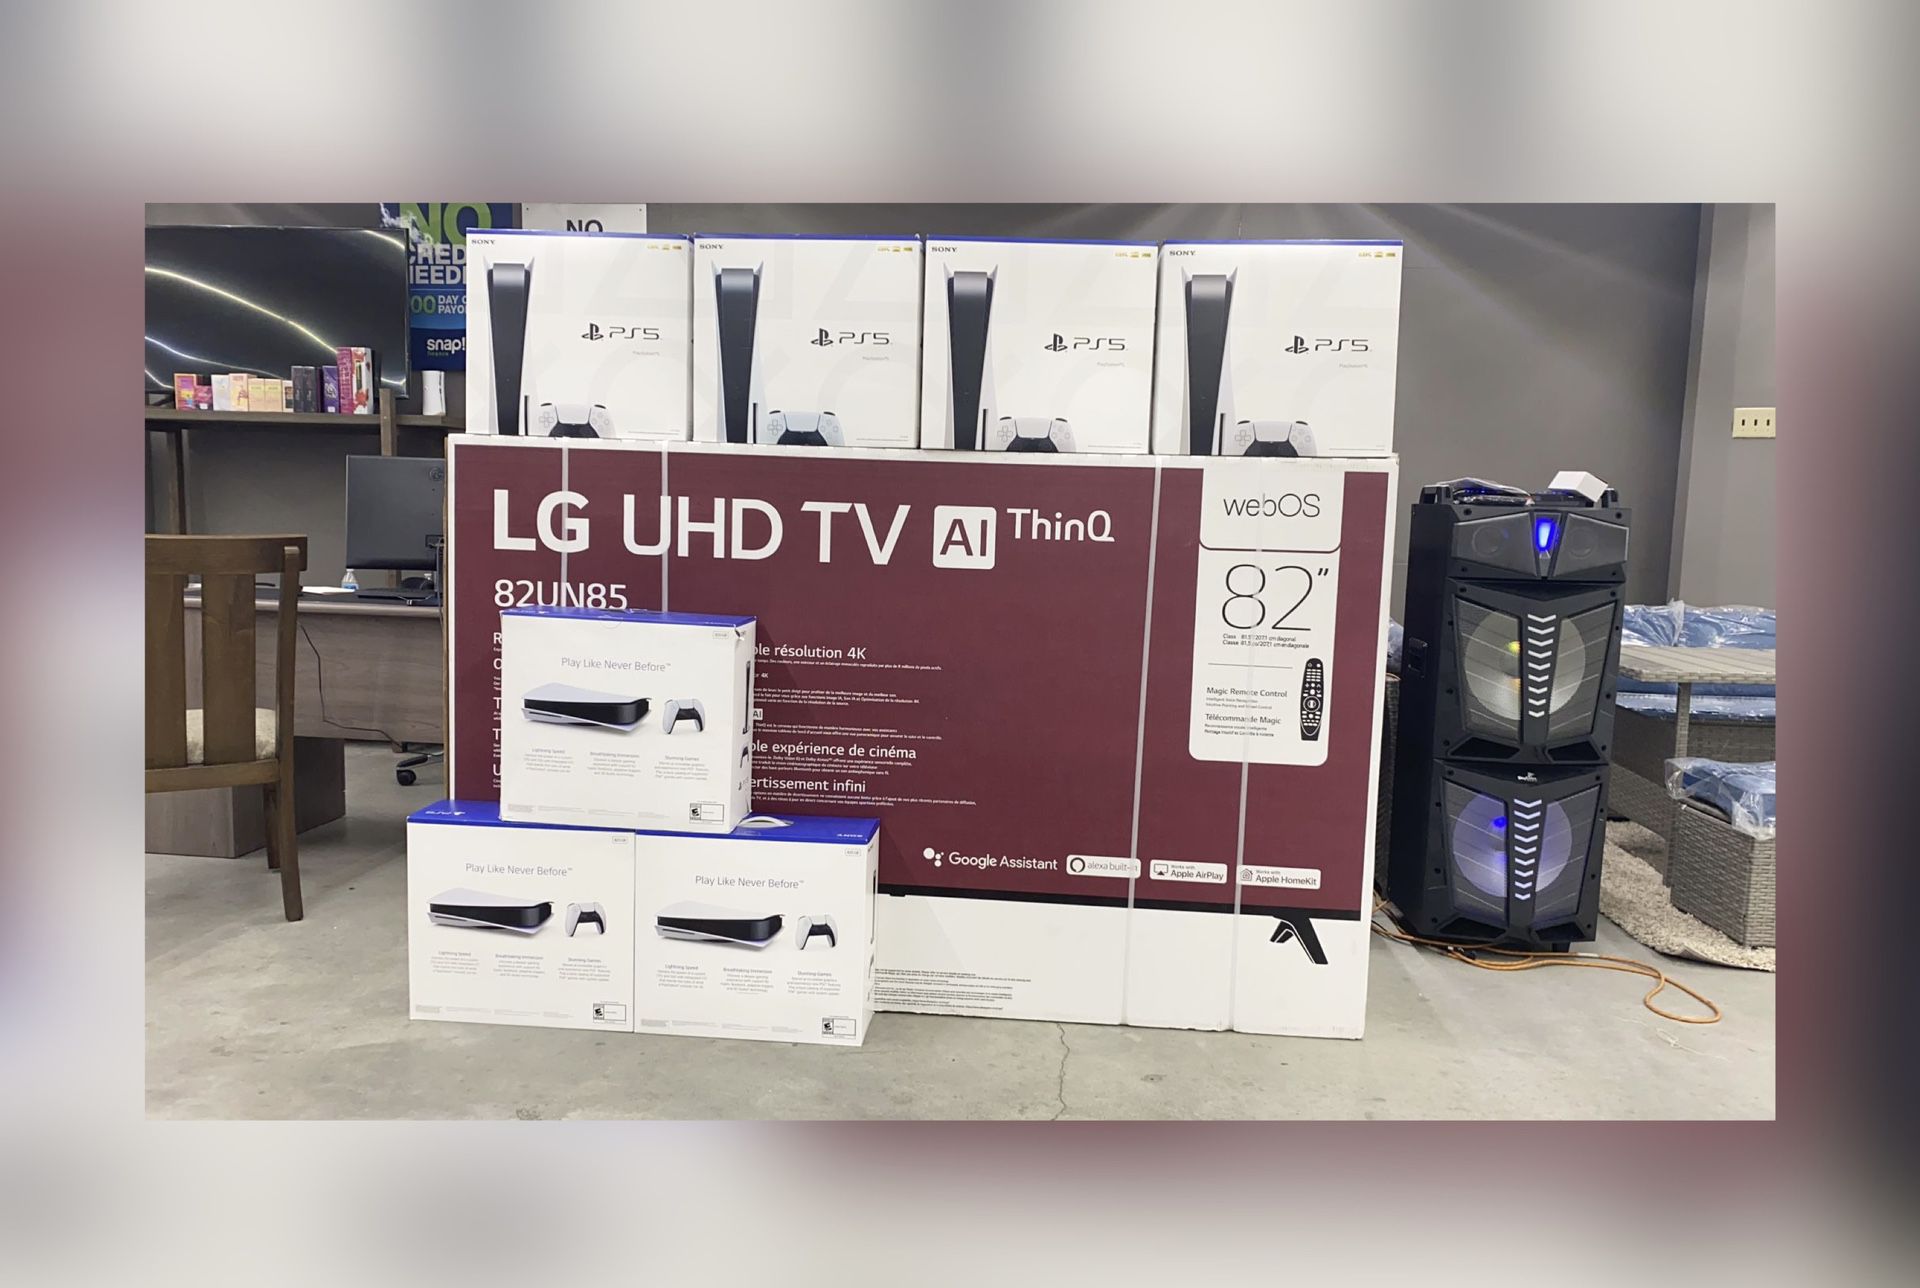 LG Smart TV 4K and Ps5 82”💥 Houston Only $54 Down Payment 🤩 We have finance, no credit needed.🥳🥳